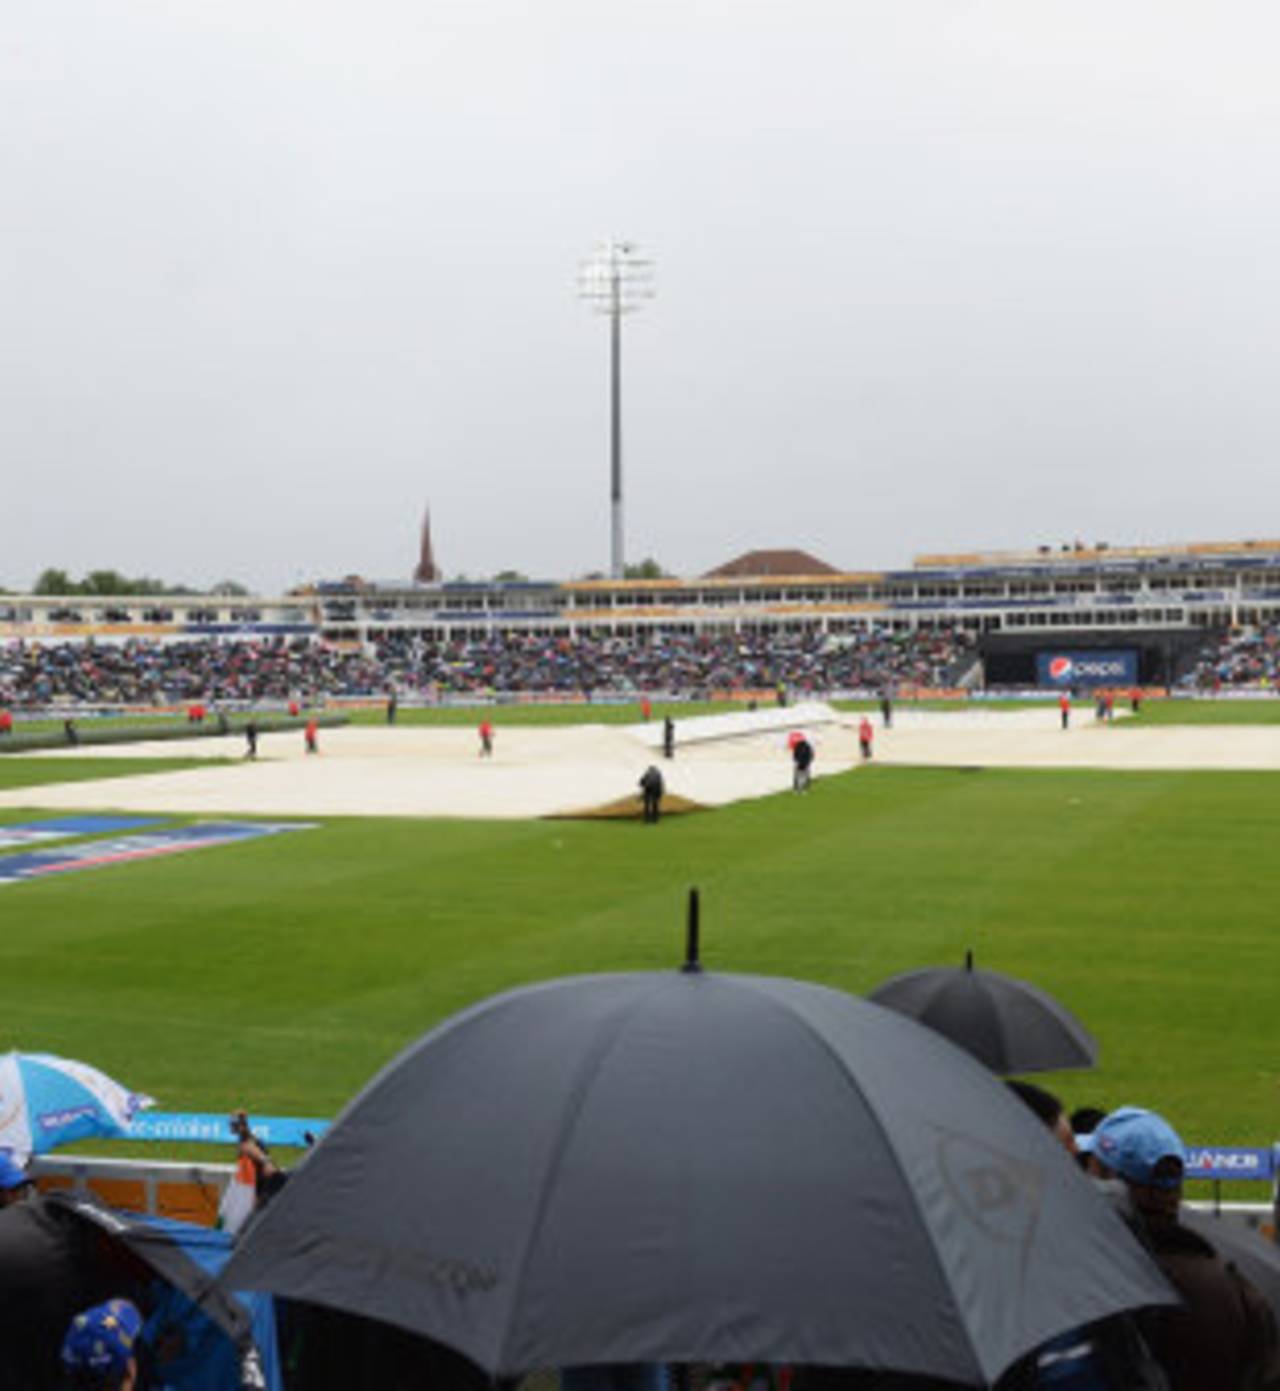 The pitch at Edgbaston is covered after a rain delay, England v India, Champions Trophy final, Edgbaston, June 23, 2013